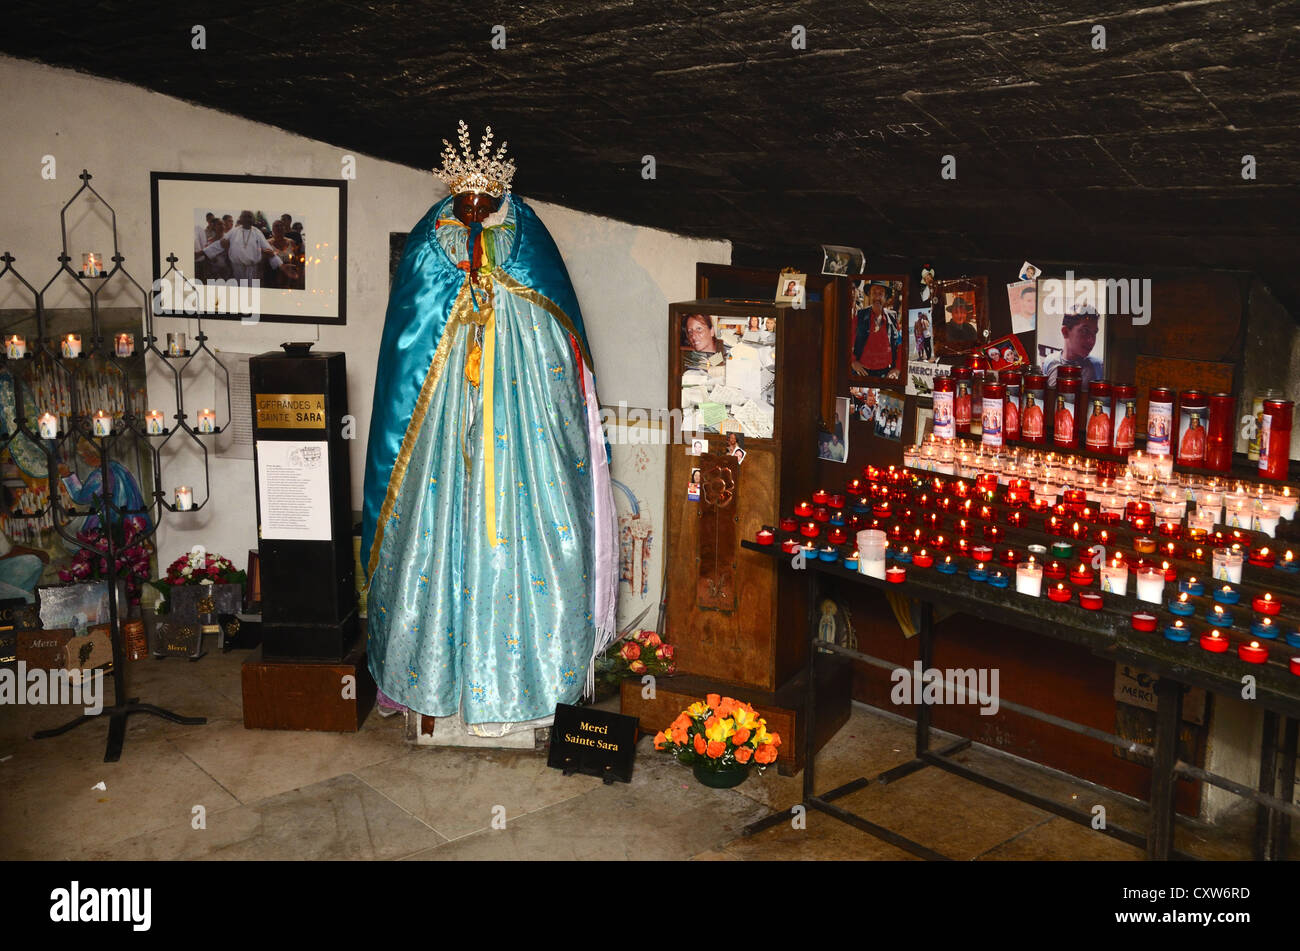 Saint Sarah Statue, Shrine & Offerings in the Crypt of the Fortified Church at Les Saintes-Maries-de-la-Mer Camargue Provence France Stock Photo